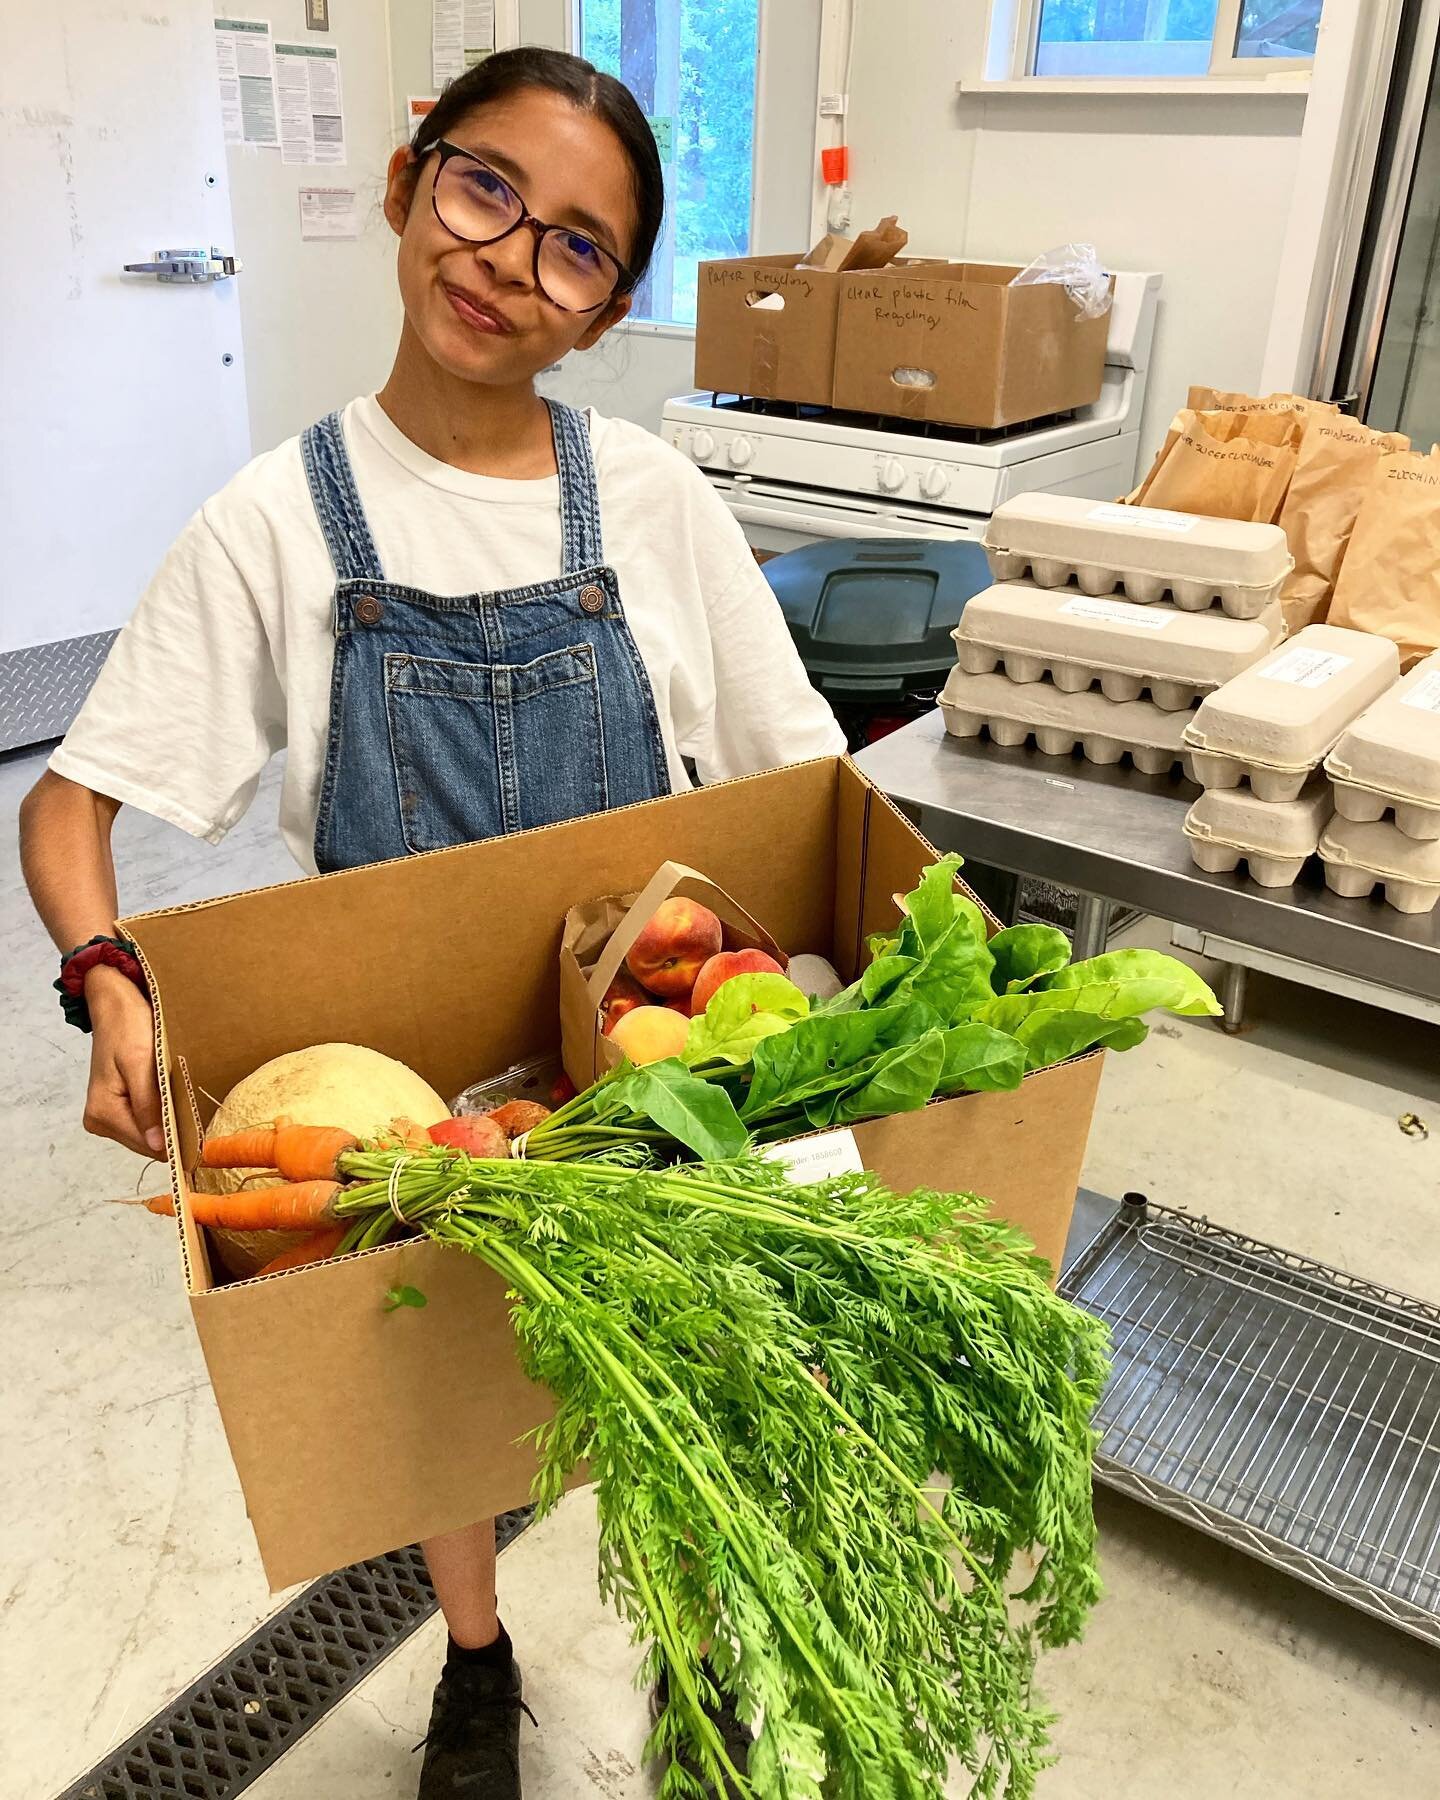 Over the last 10 weeks, college students have been living, interning &amp; studying in the Methow Valley through Western WA University&rsquo;s Sustainability Pathways program, &amp; we were so lucky to get to work with Yareli Barragan (@thebookhuntr 